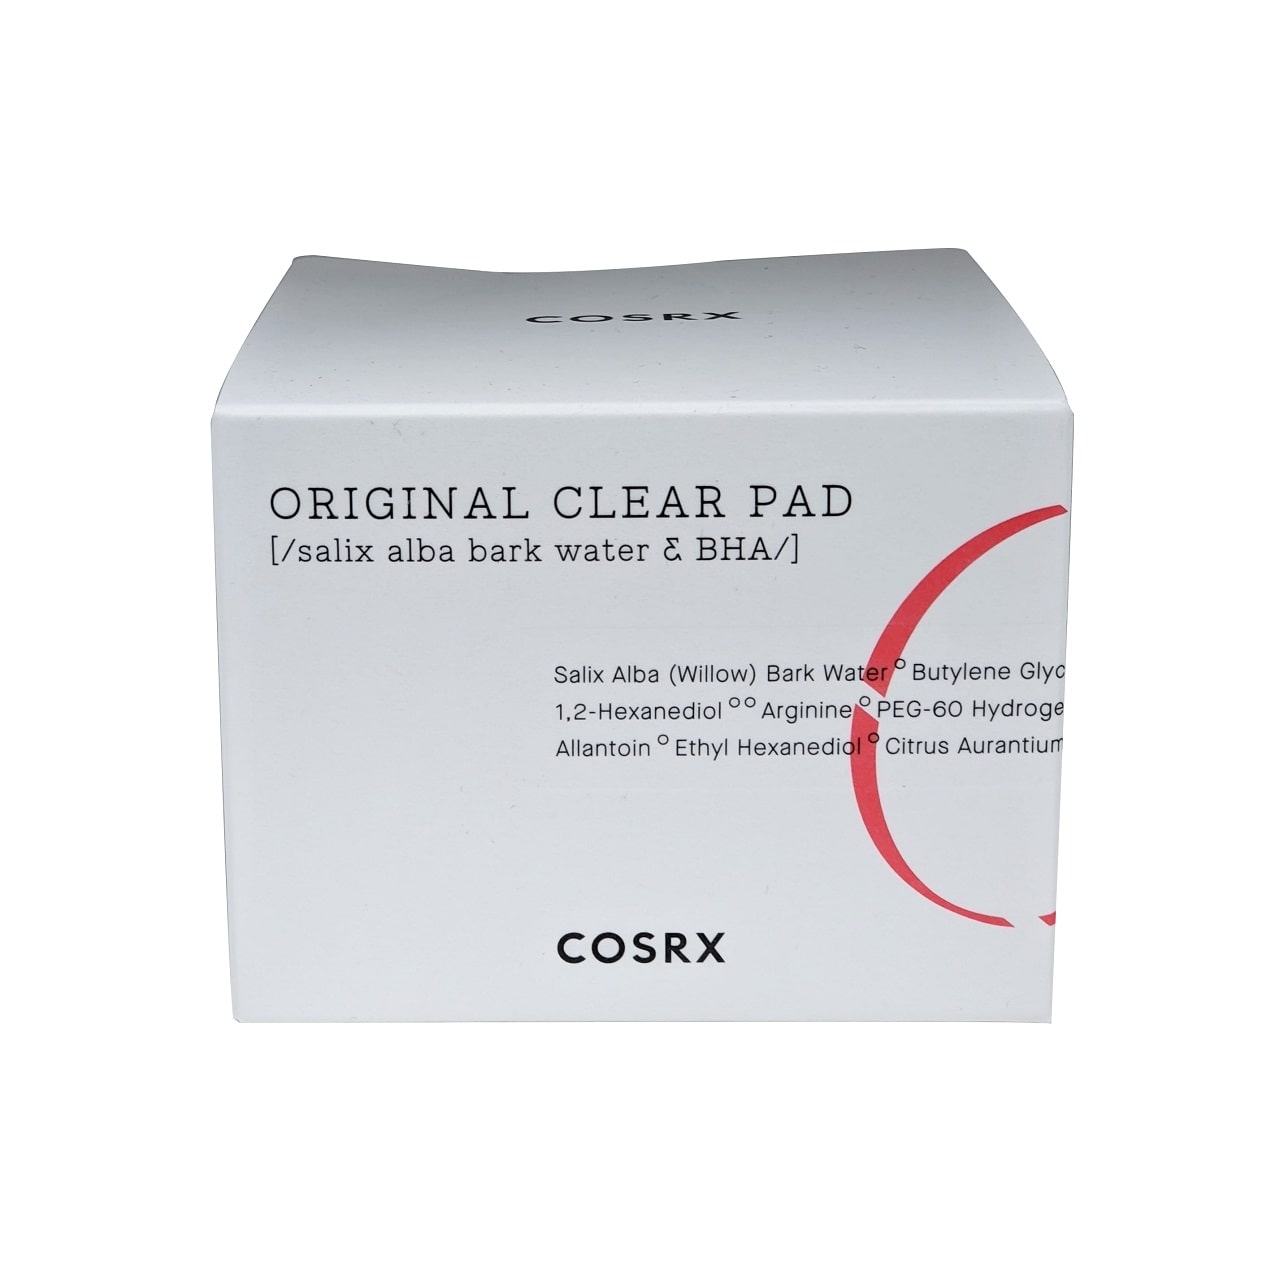 Product label for COSRX One Step Original Clear Pad